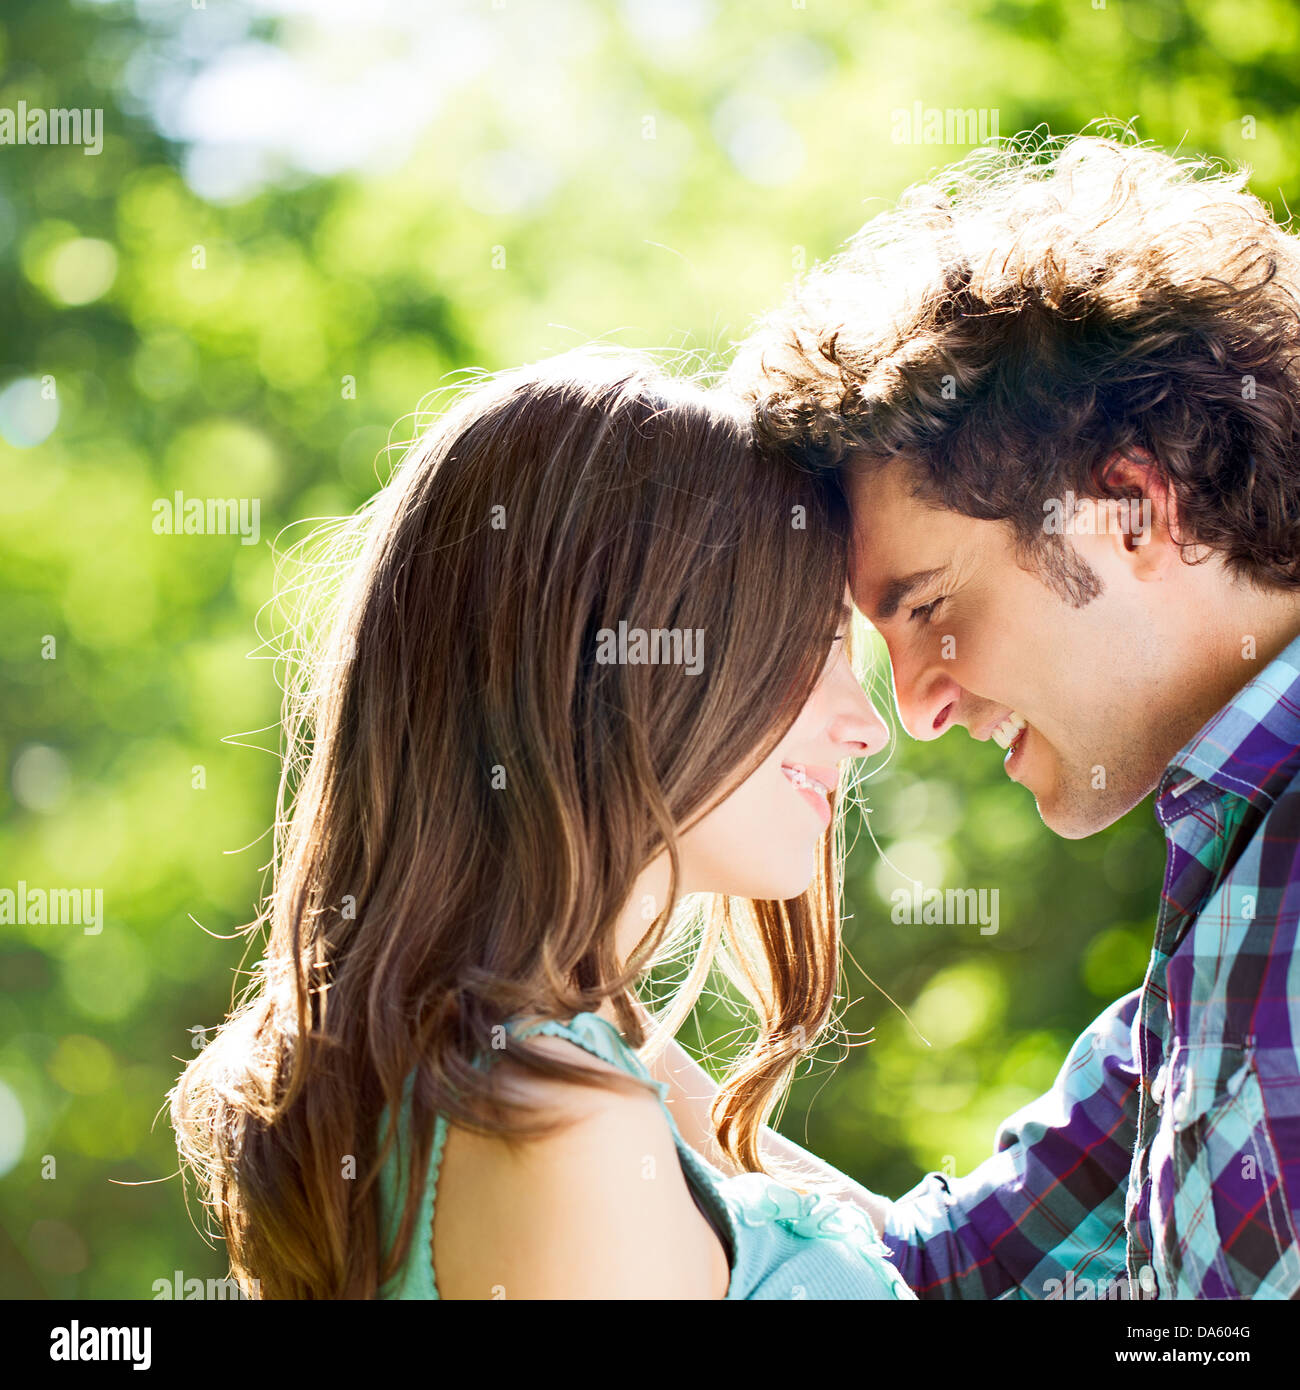 A happy couple standing face to face and smiling. Stock Photo